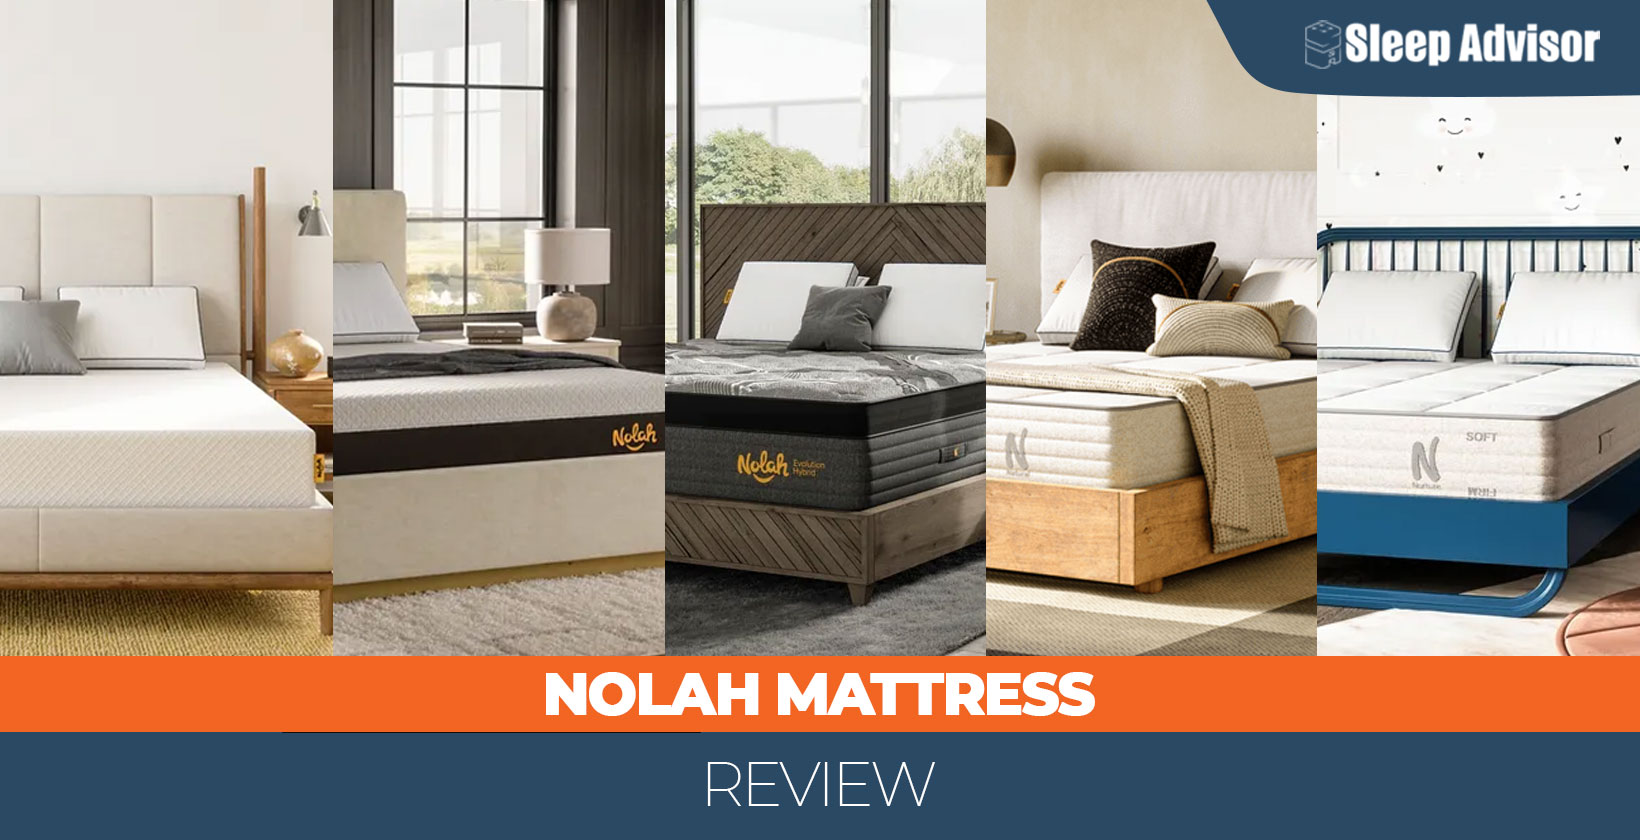 Nolah Mattress Review and Prices